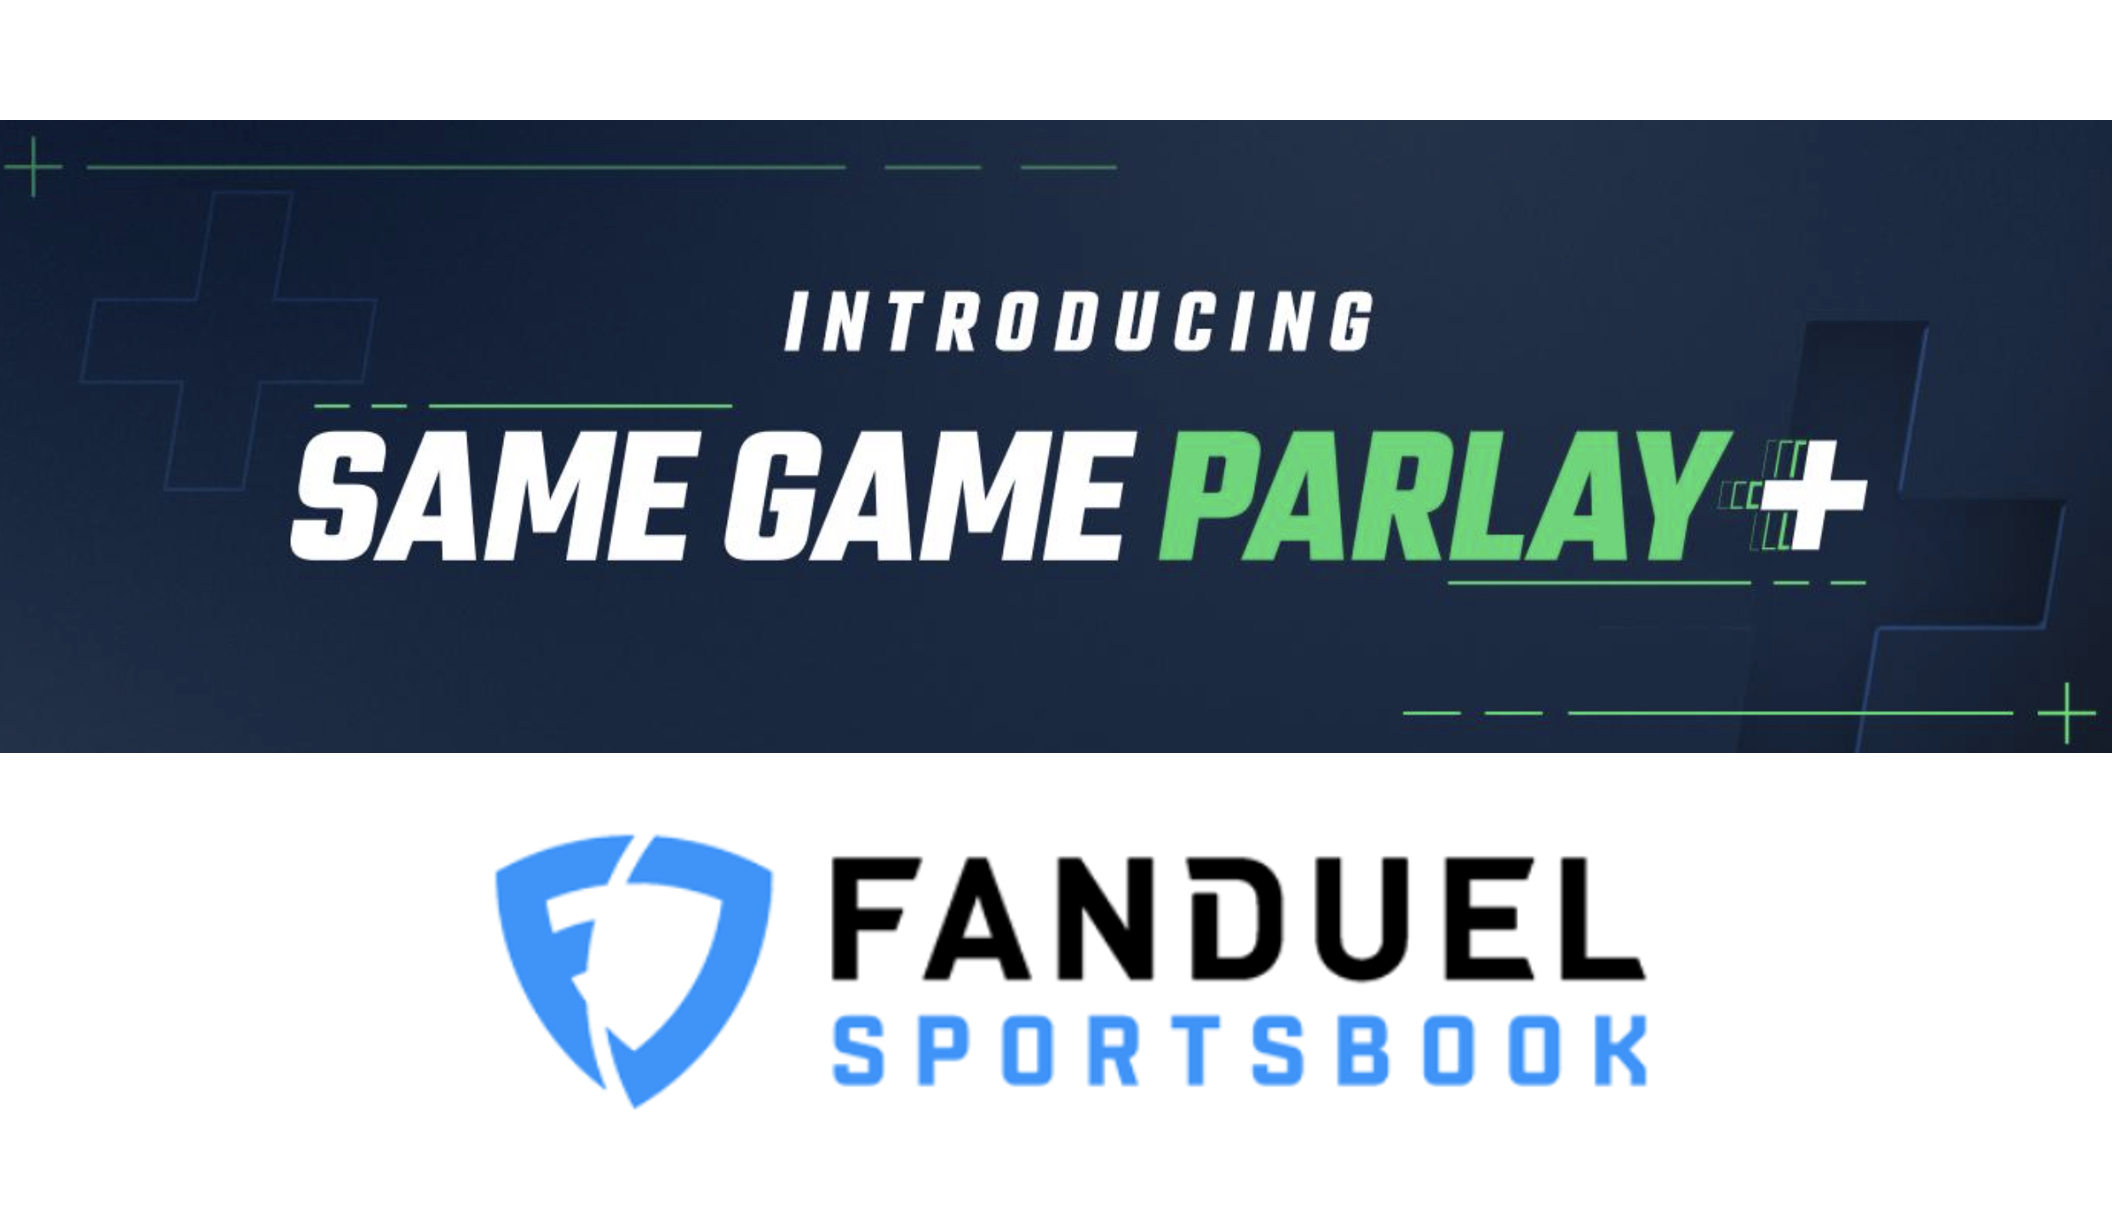 Same Game Parlay Plus, the new offering from FanDuel Sportsbook